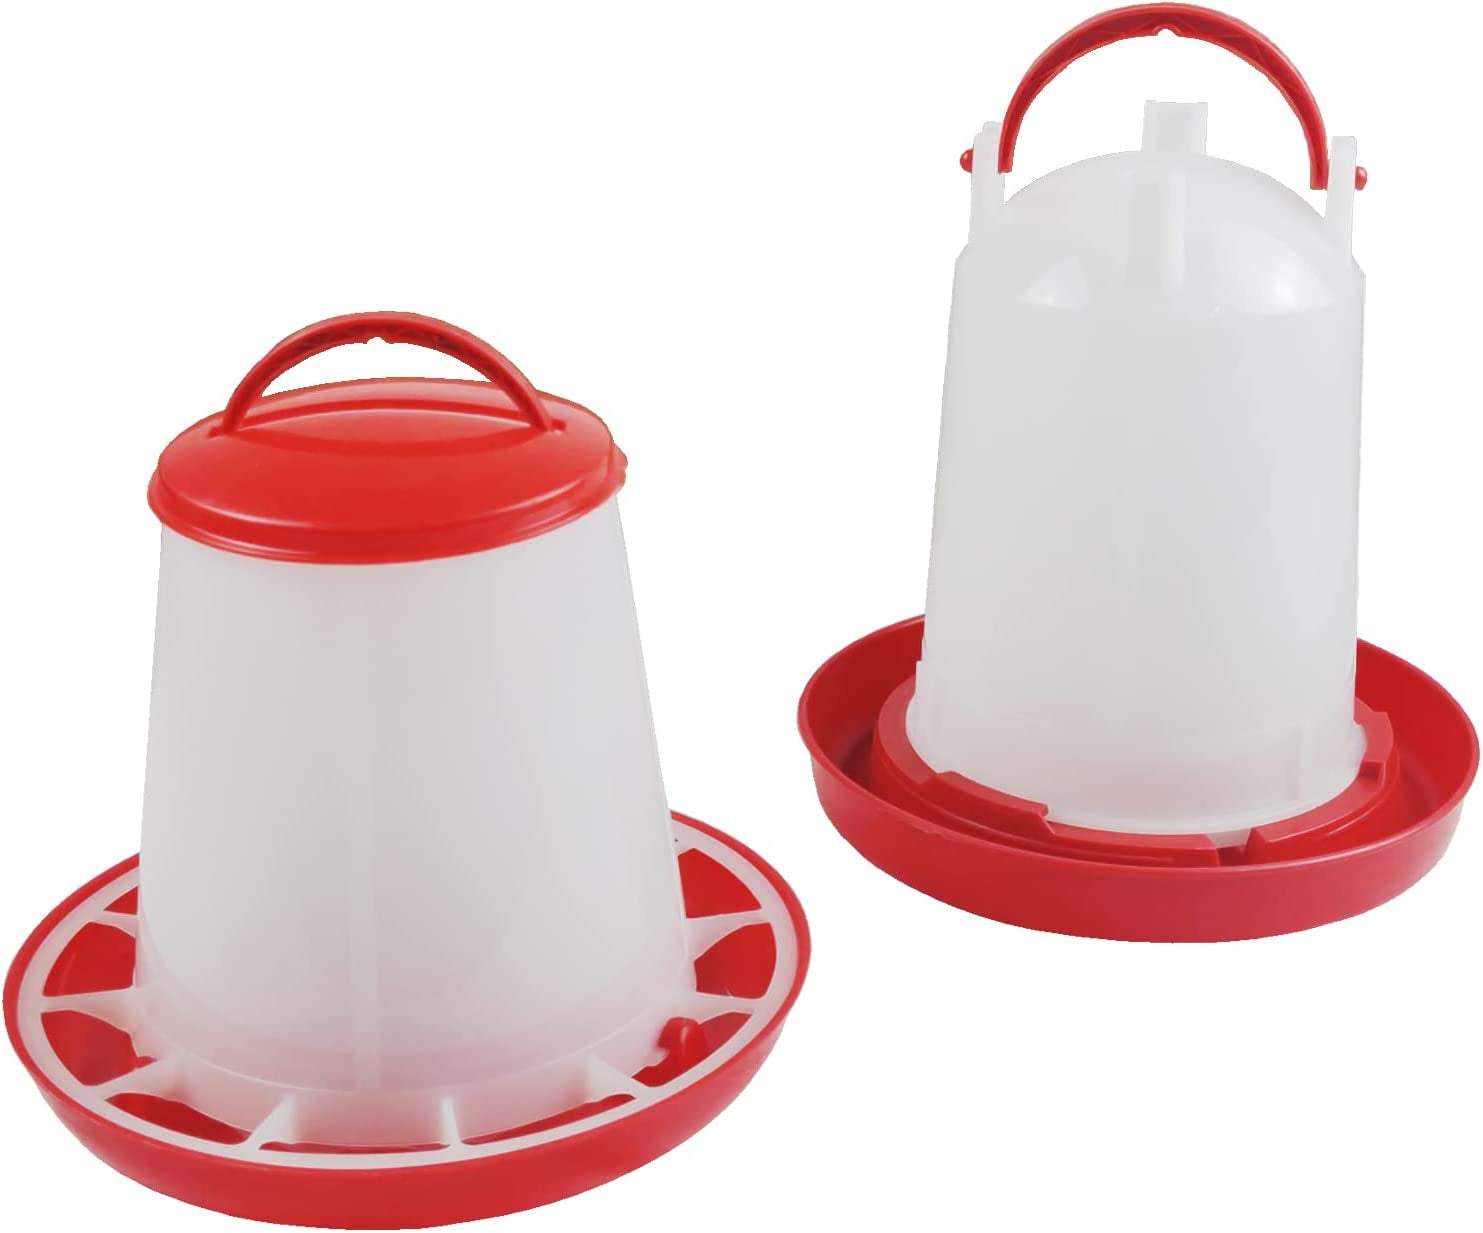 KUANMIN, KUANMIN Chick Feeder & Water Kit, 2 Sets of 3.3Lb Chick Feeders & 1L Chick Waterers, Plastic Poultry Feeder (Red and White), Set of 2